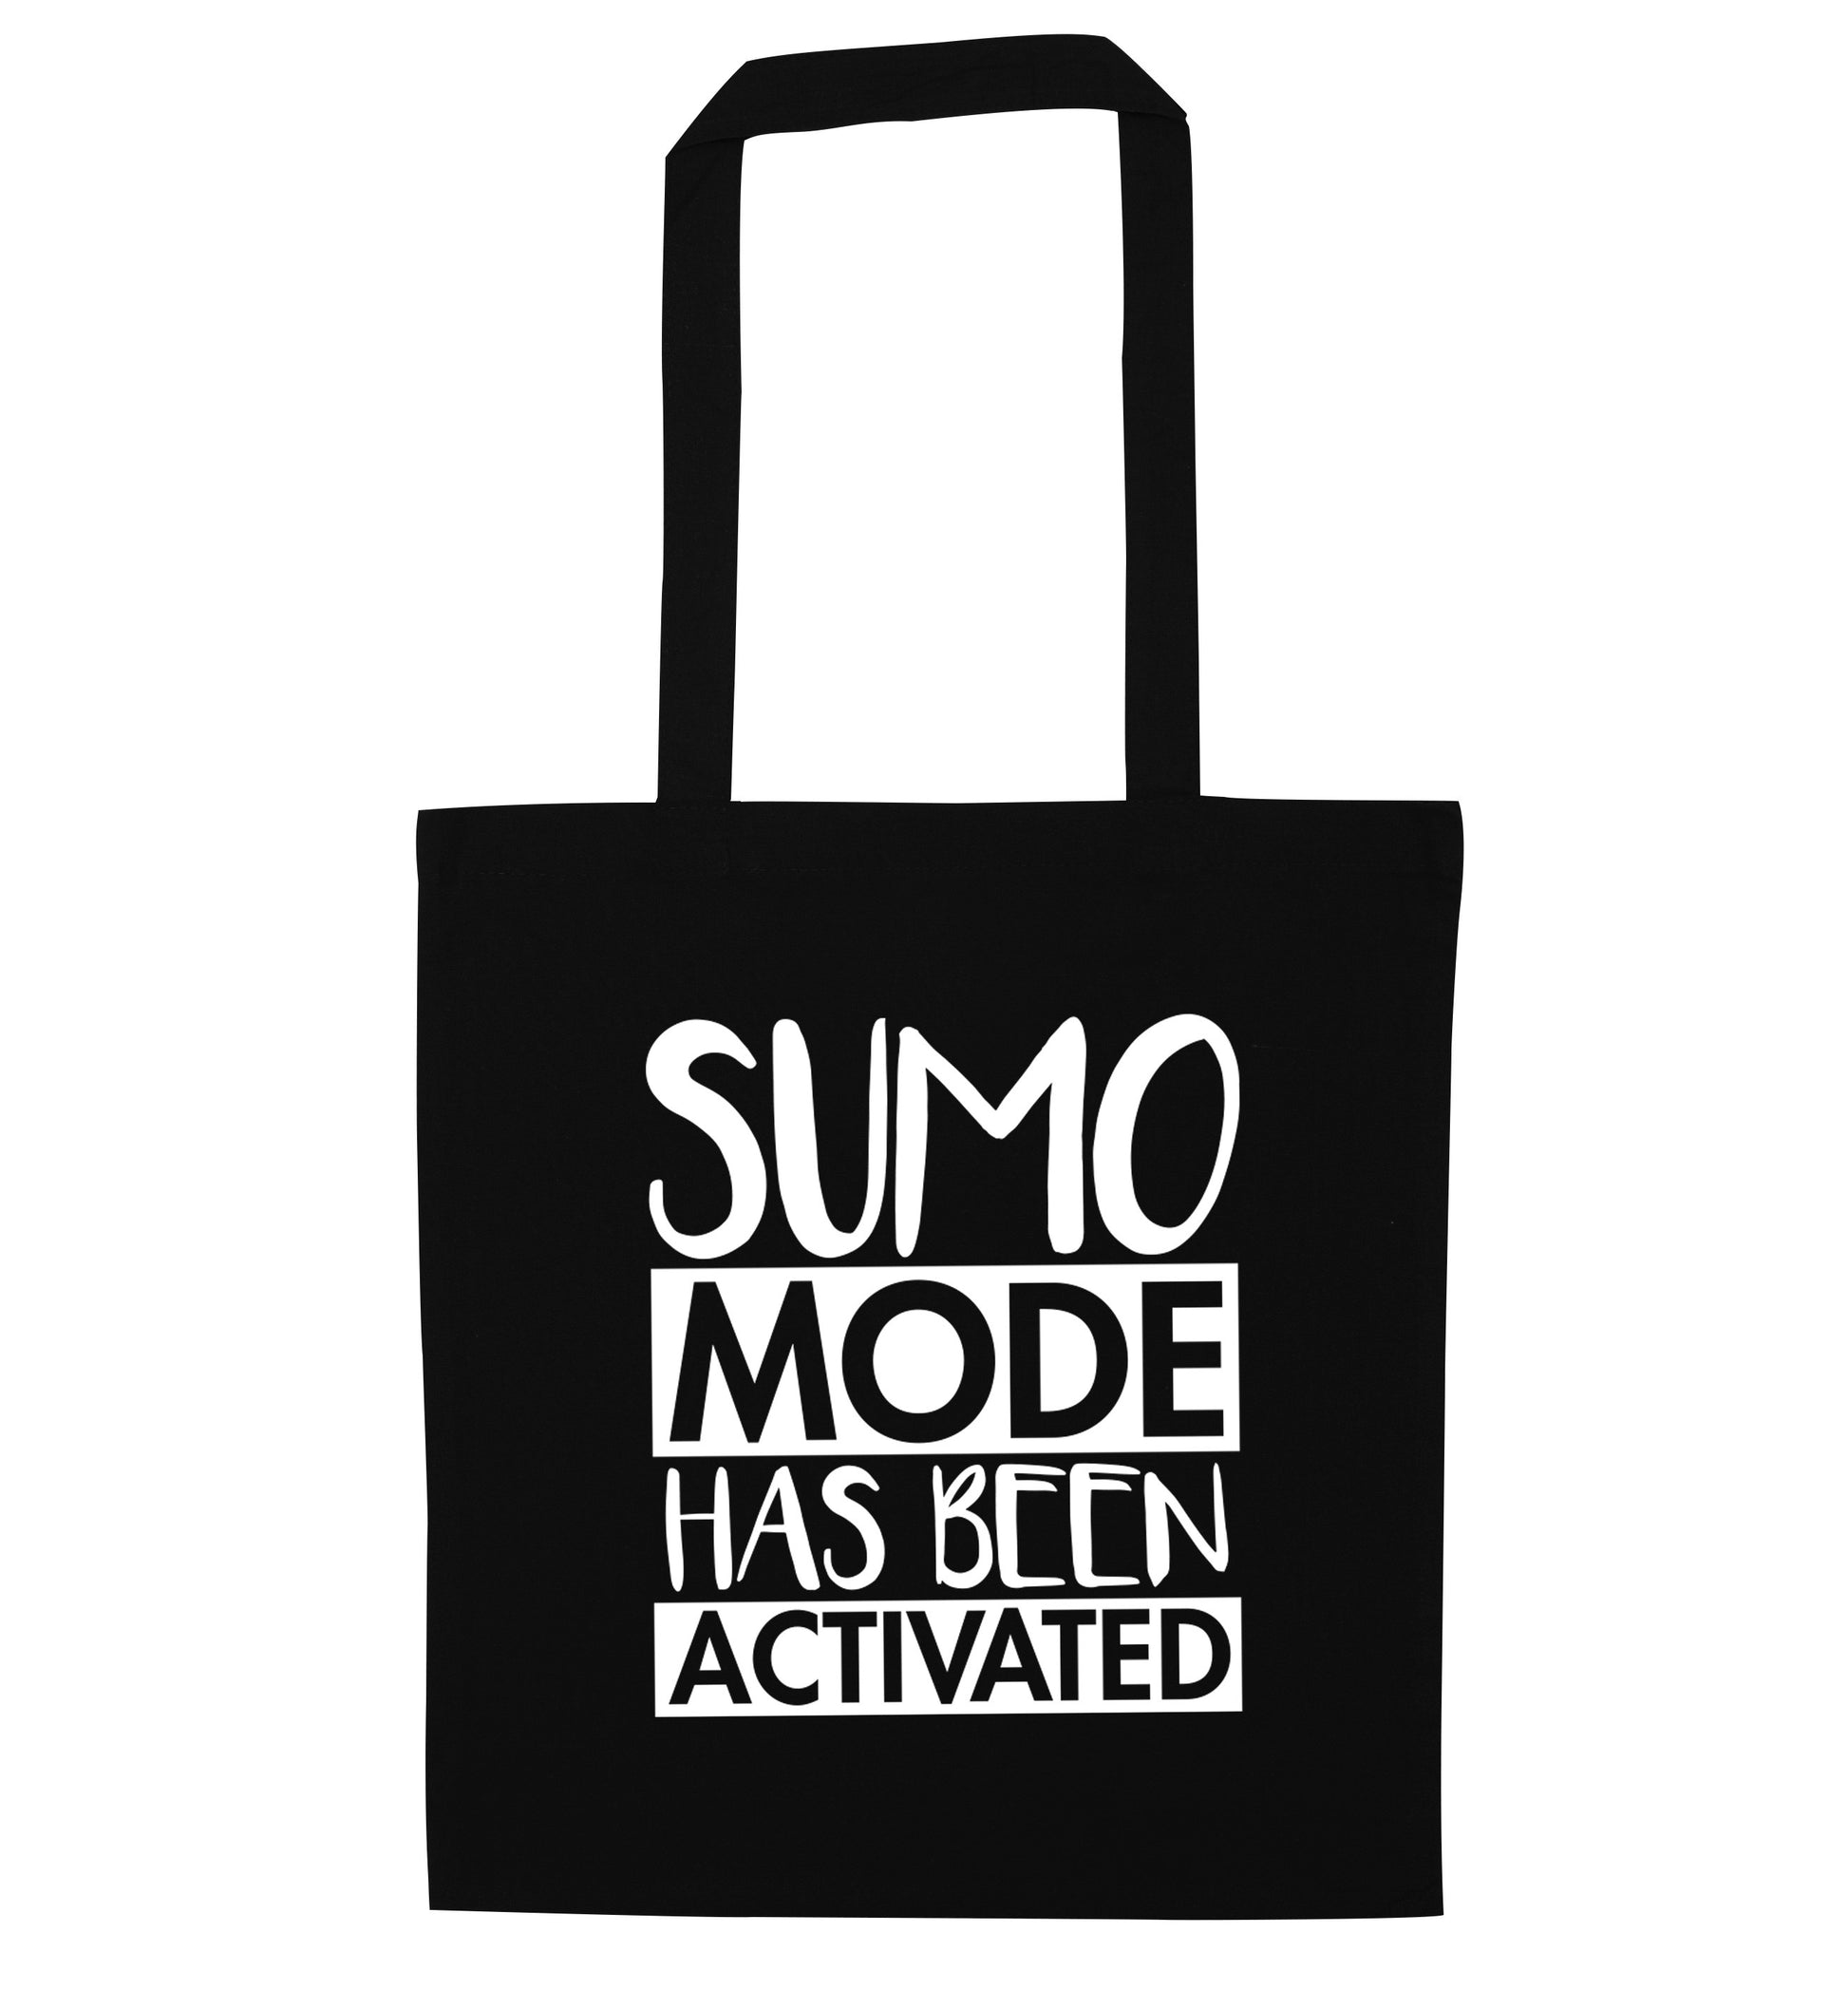 Sumo mode activated black tote bag